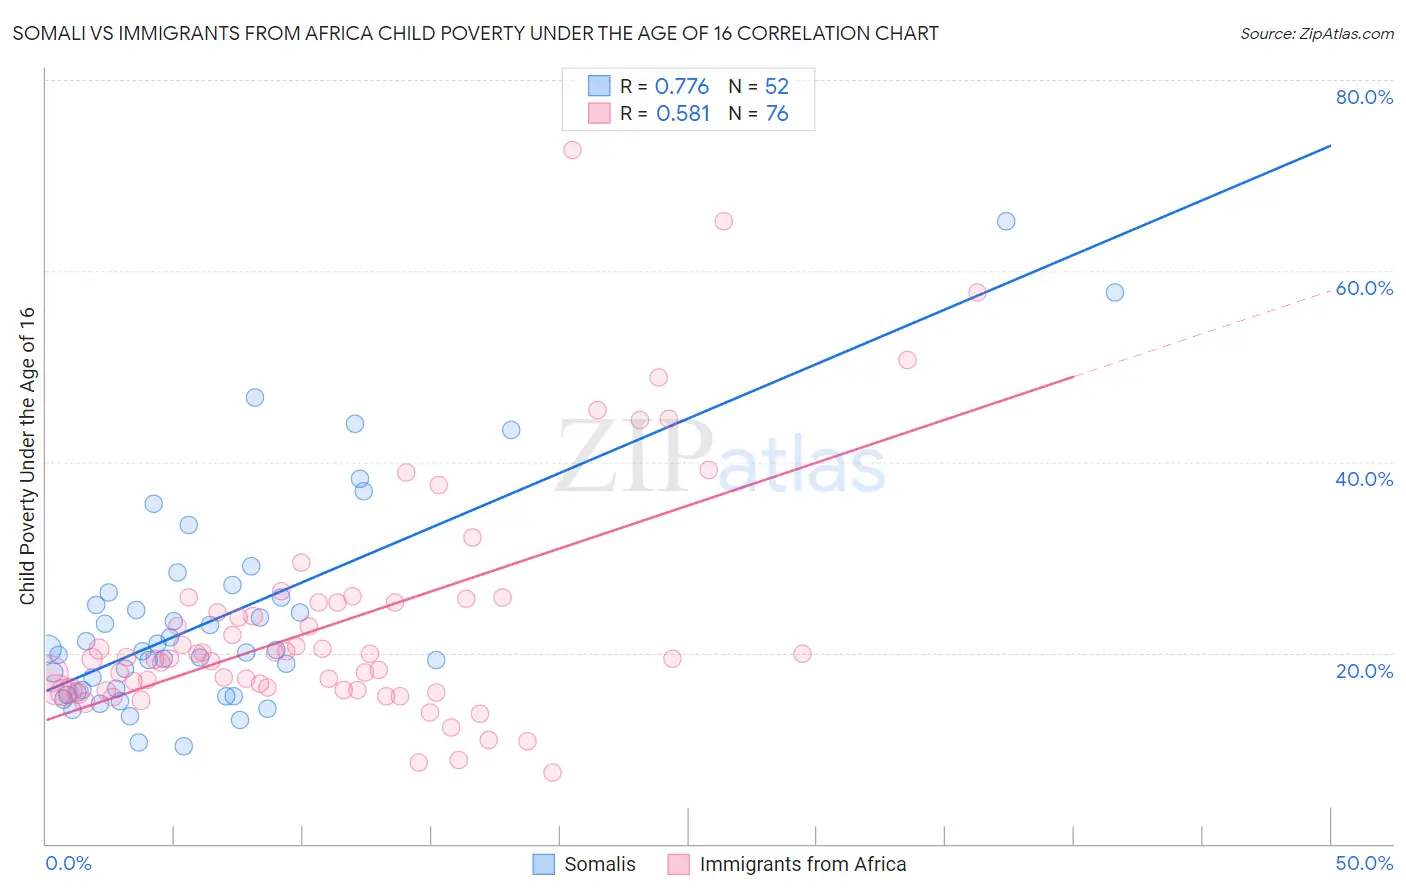 Somali vs Immigrants from Africa Child Poverty Under the Age of 16